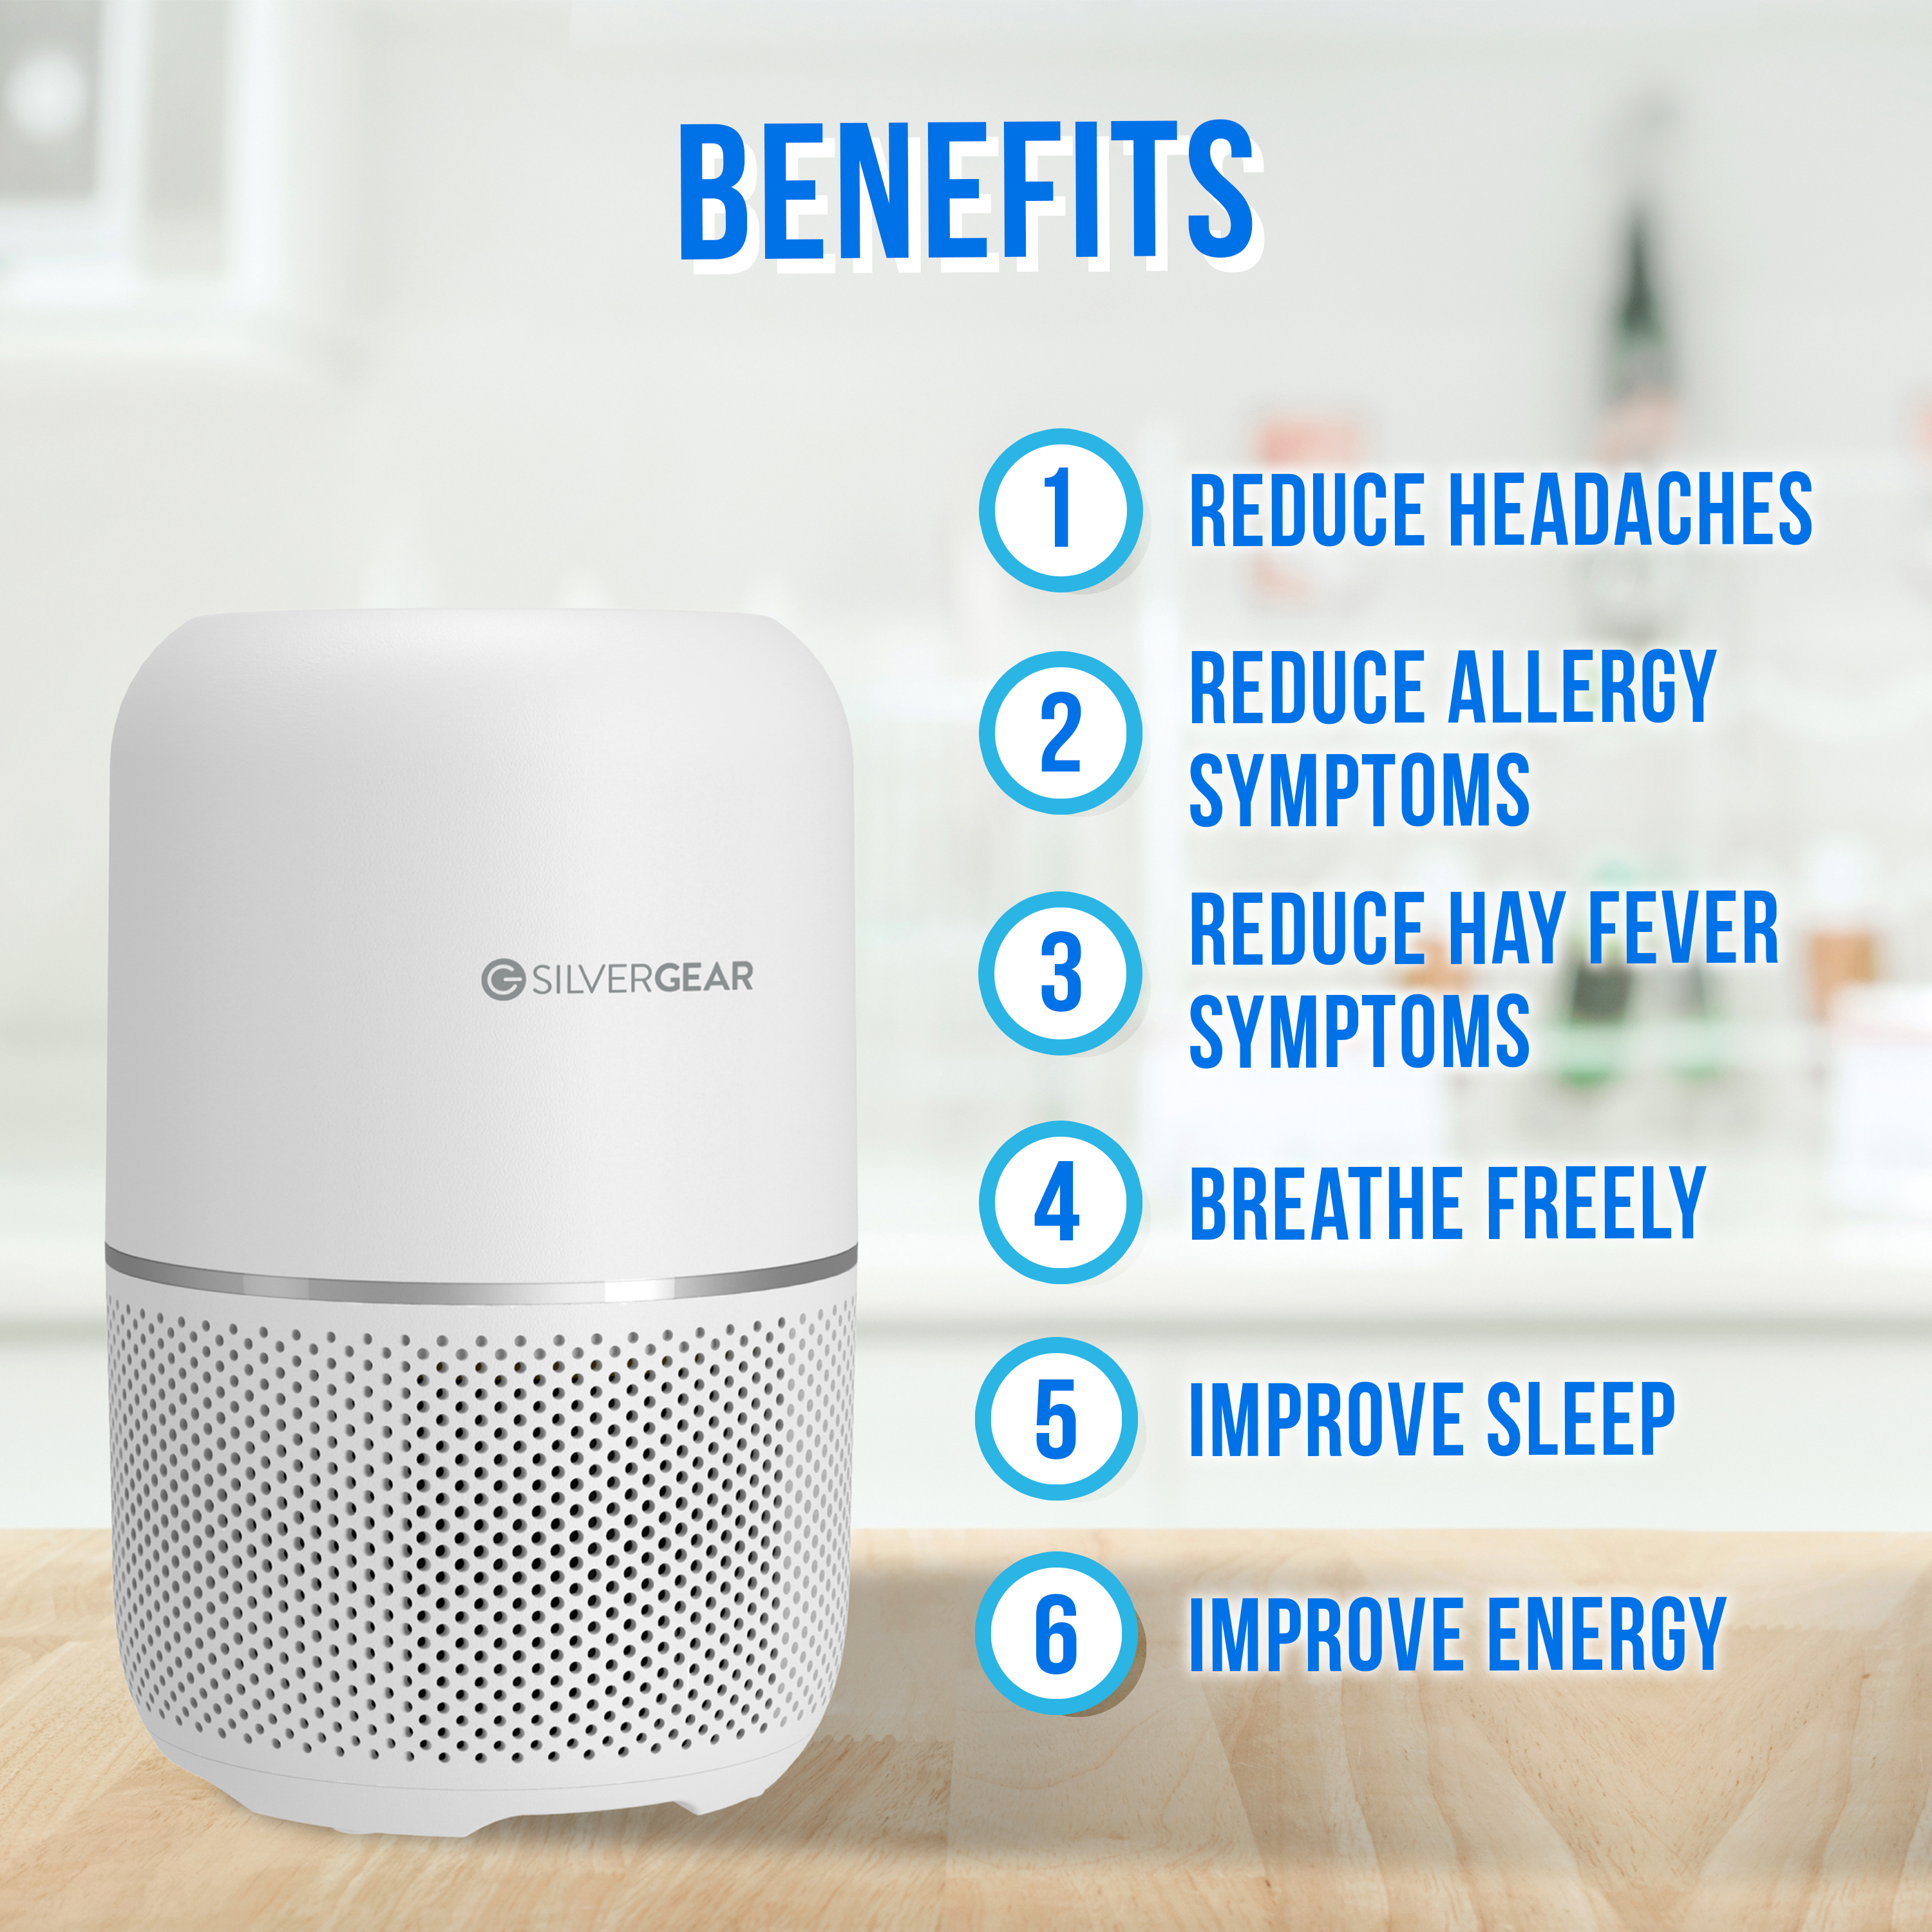 What is an air purifier good for?